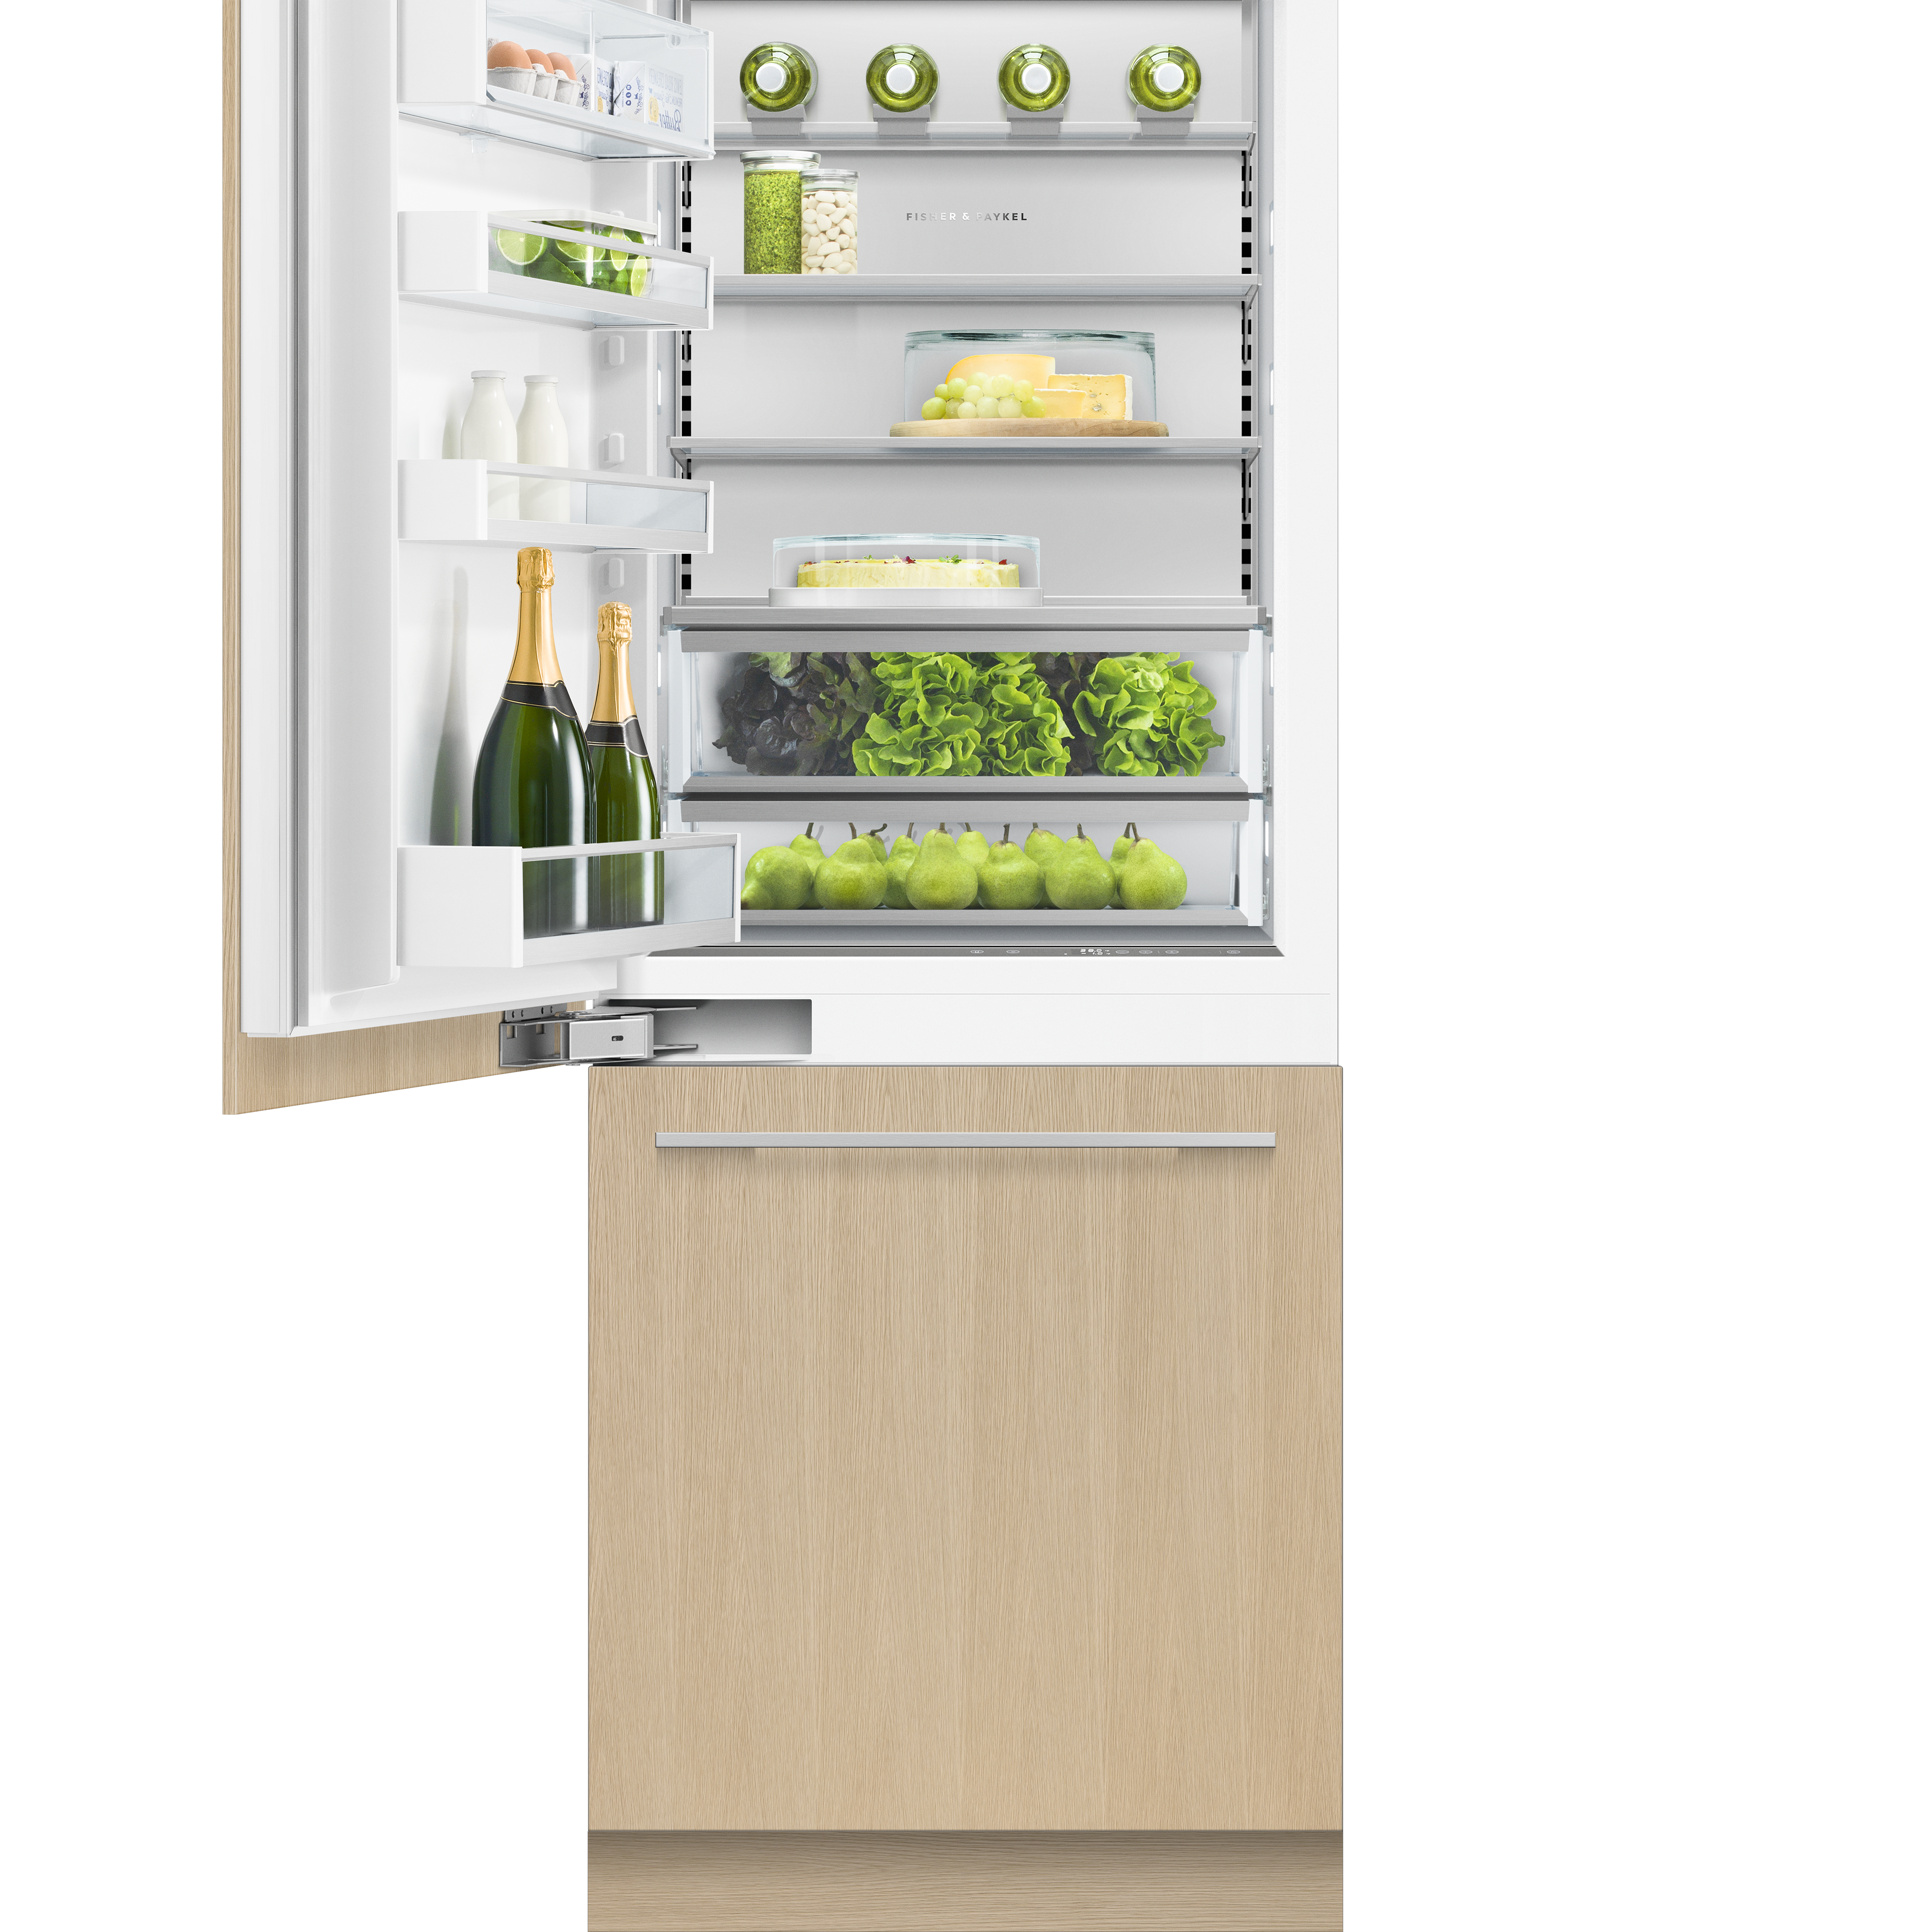 Model: RS3084WLU1 | Fisher and Paykel Integrated Refrigerator Freezer, 30", Ice & Water